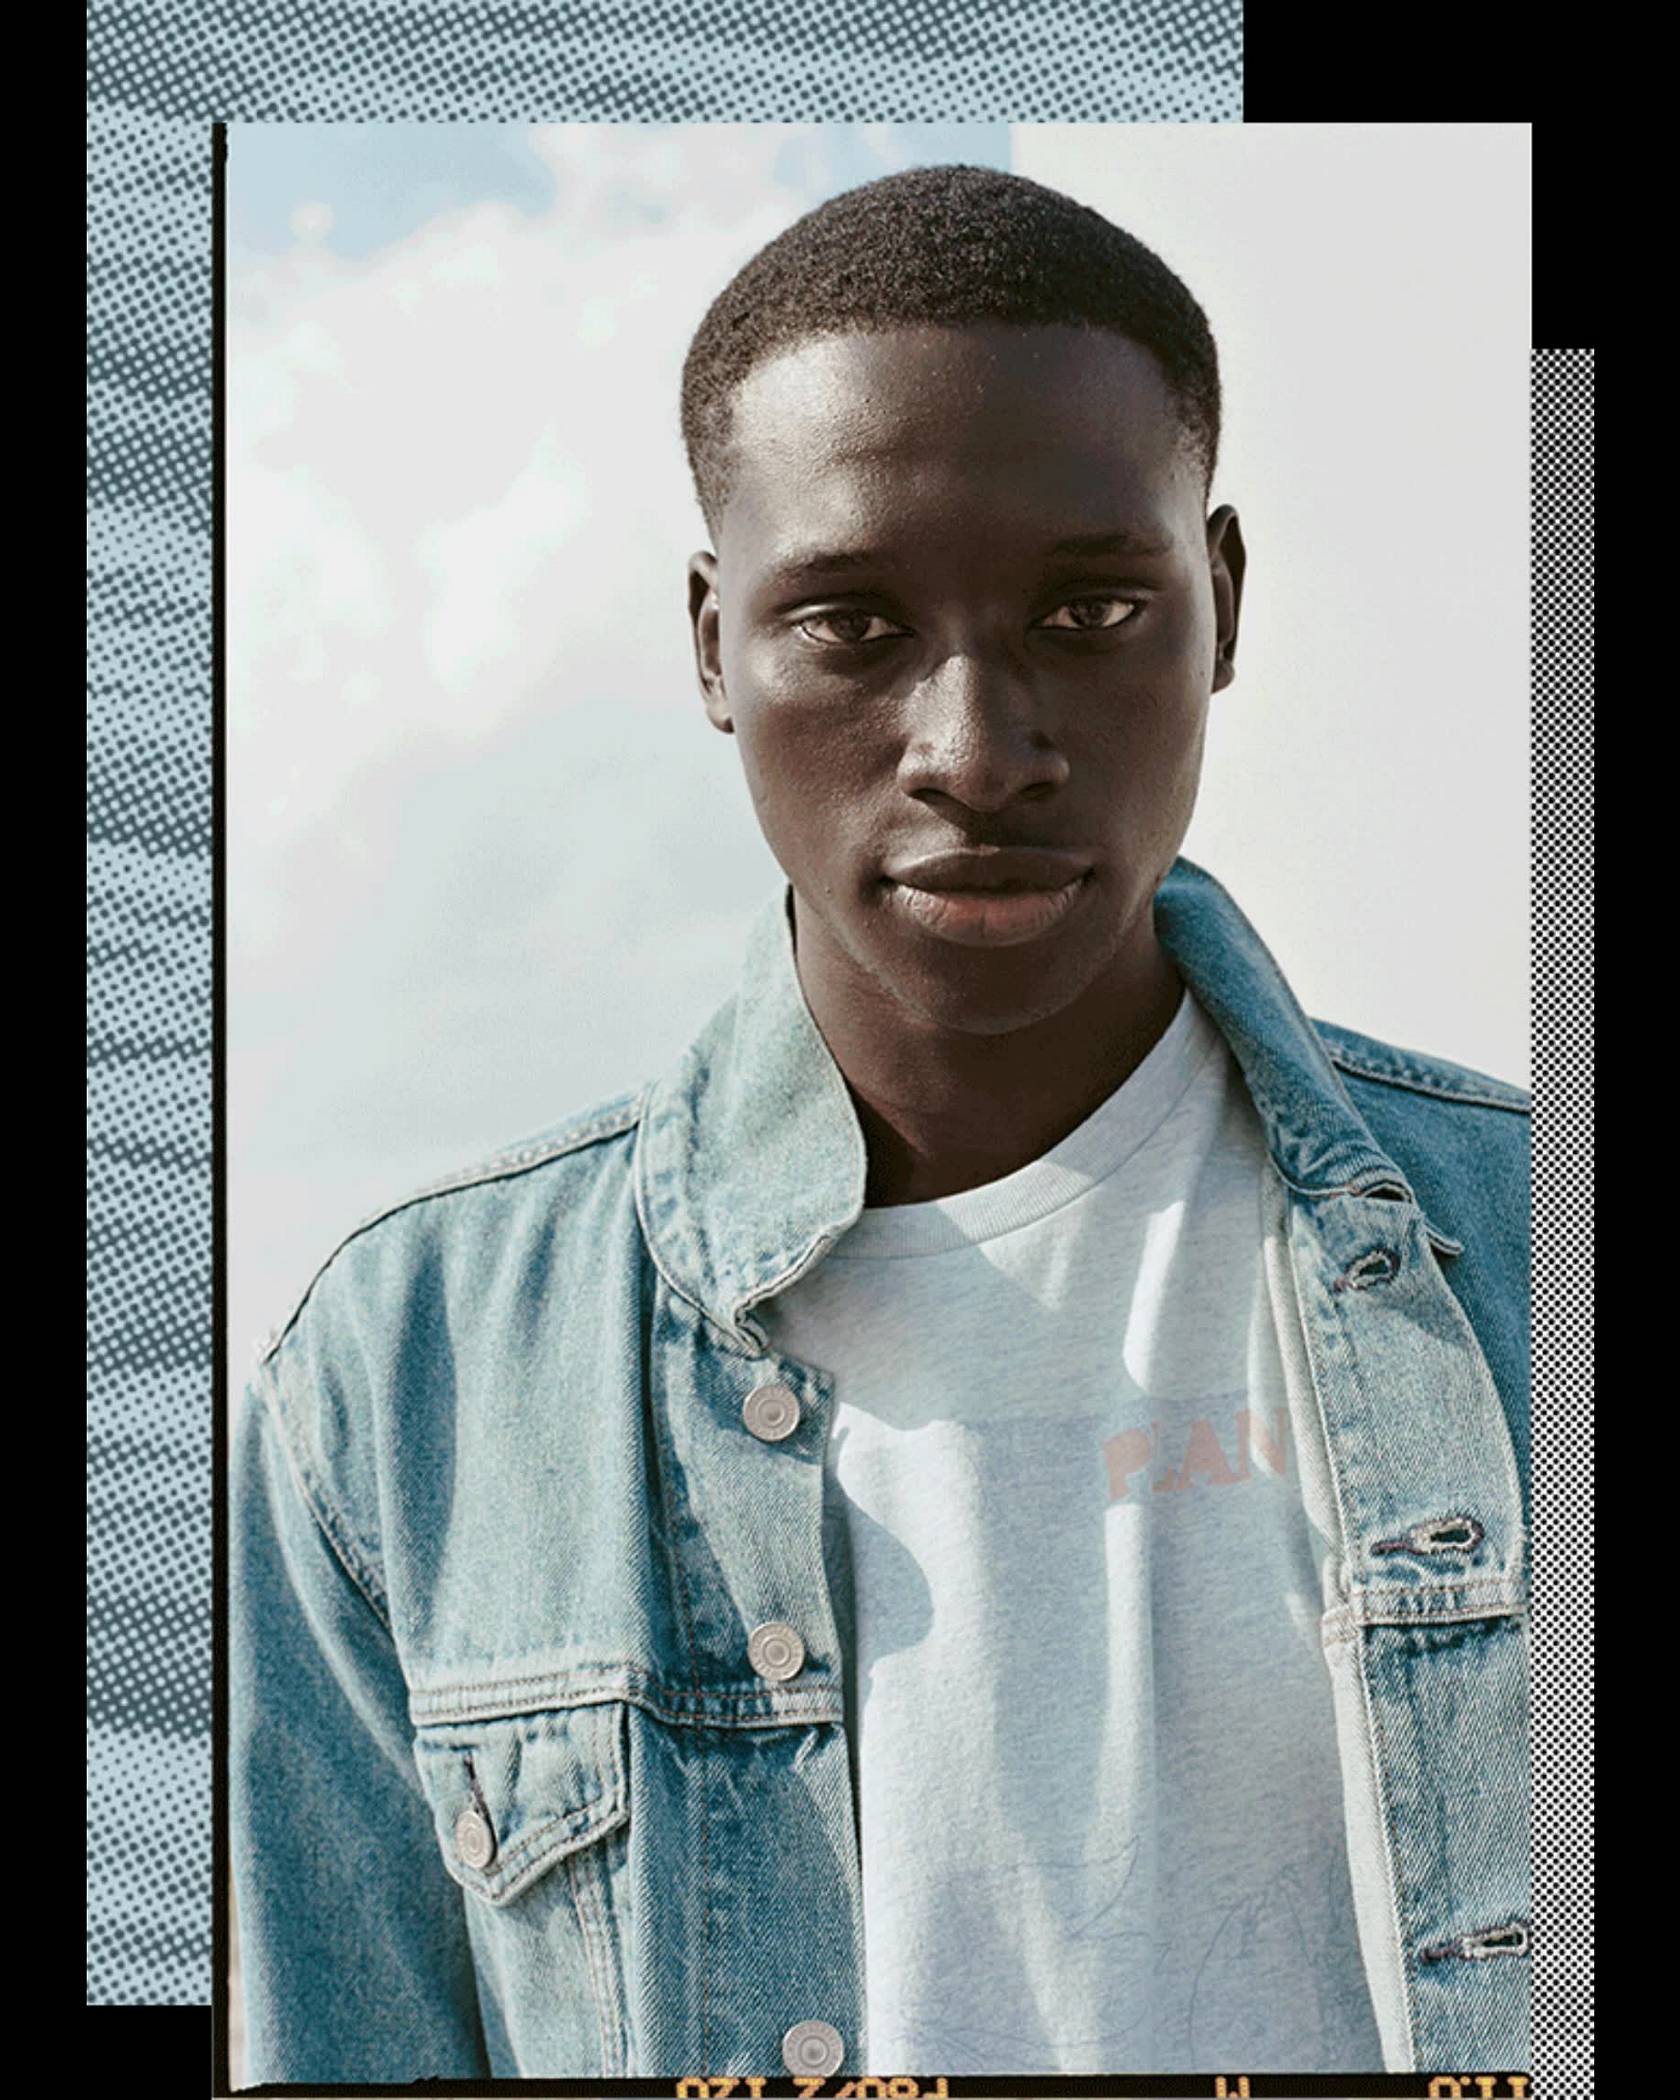 A portrait photo of a man wearing Levi's Wellthread jean jacket and a white tee